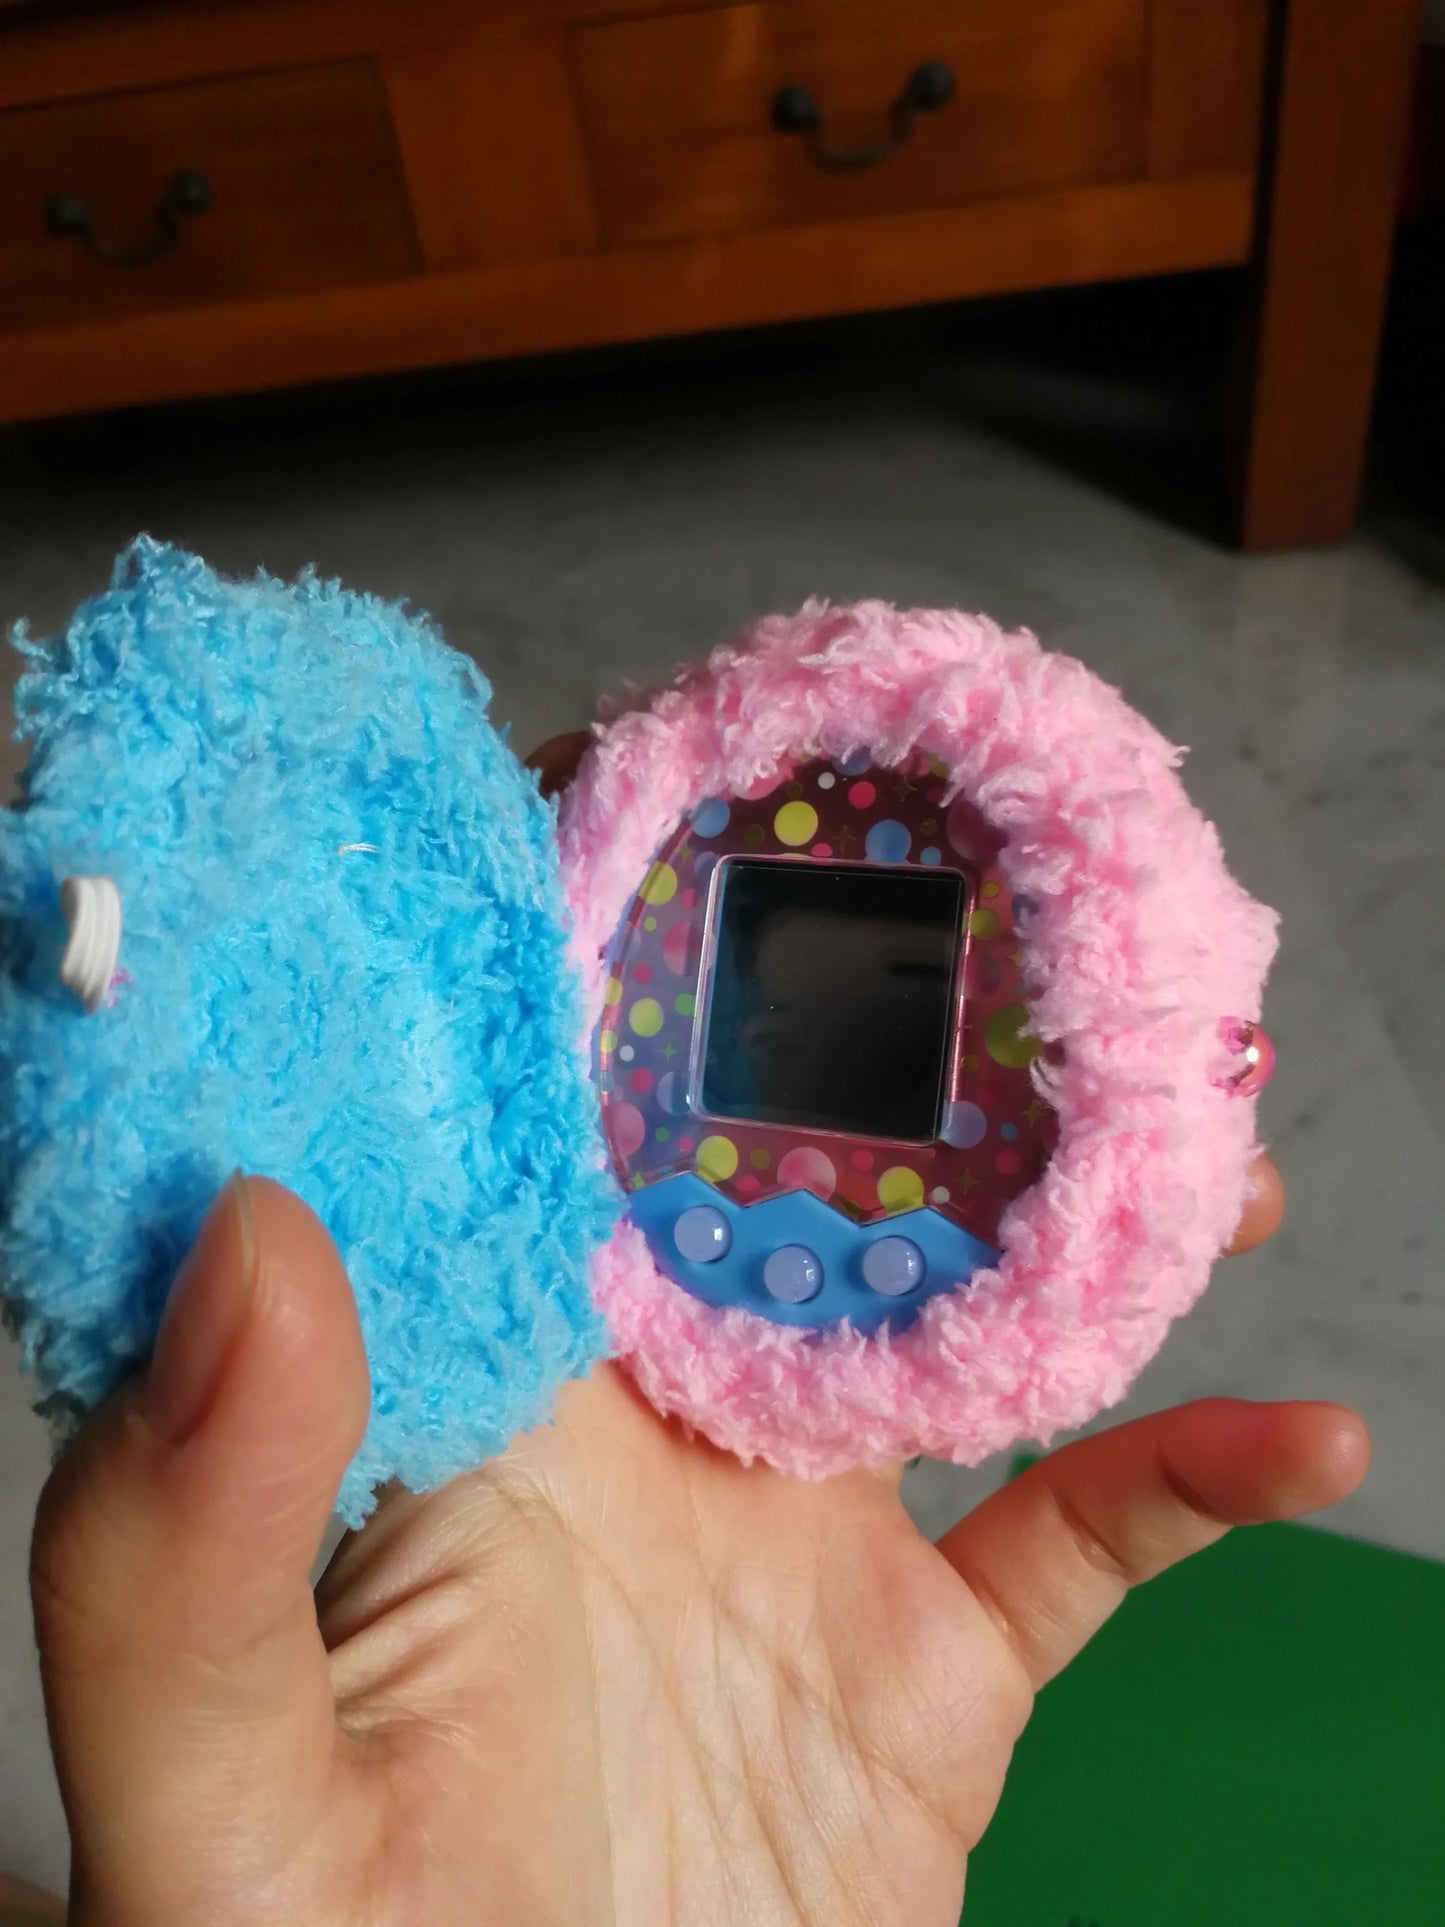 Tamagotchi case - Twinstar 2 in 1 with front cover Fuzzy N Chic